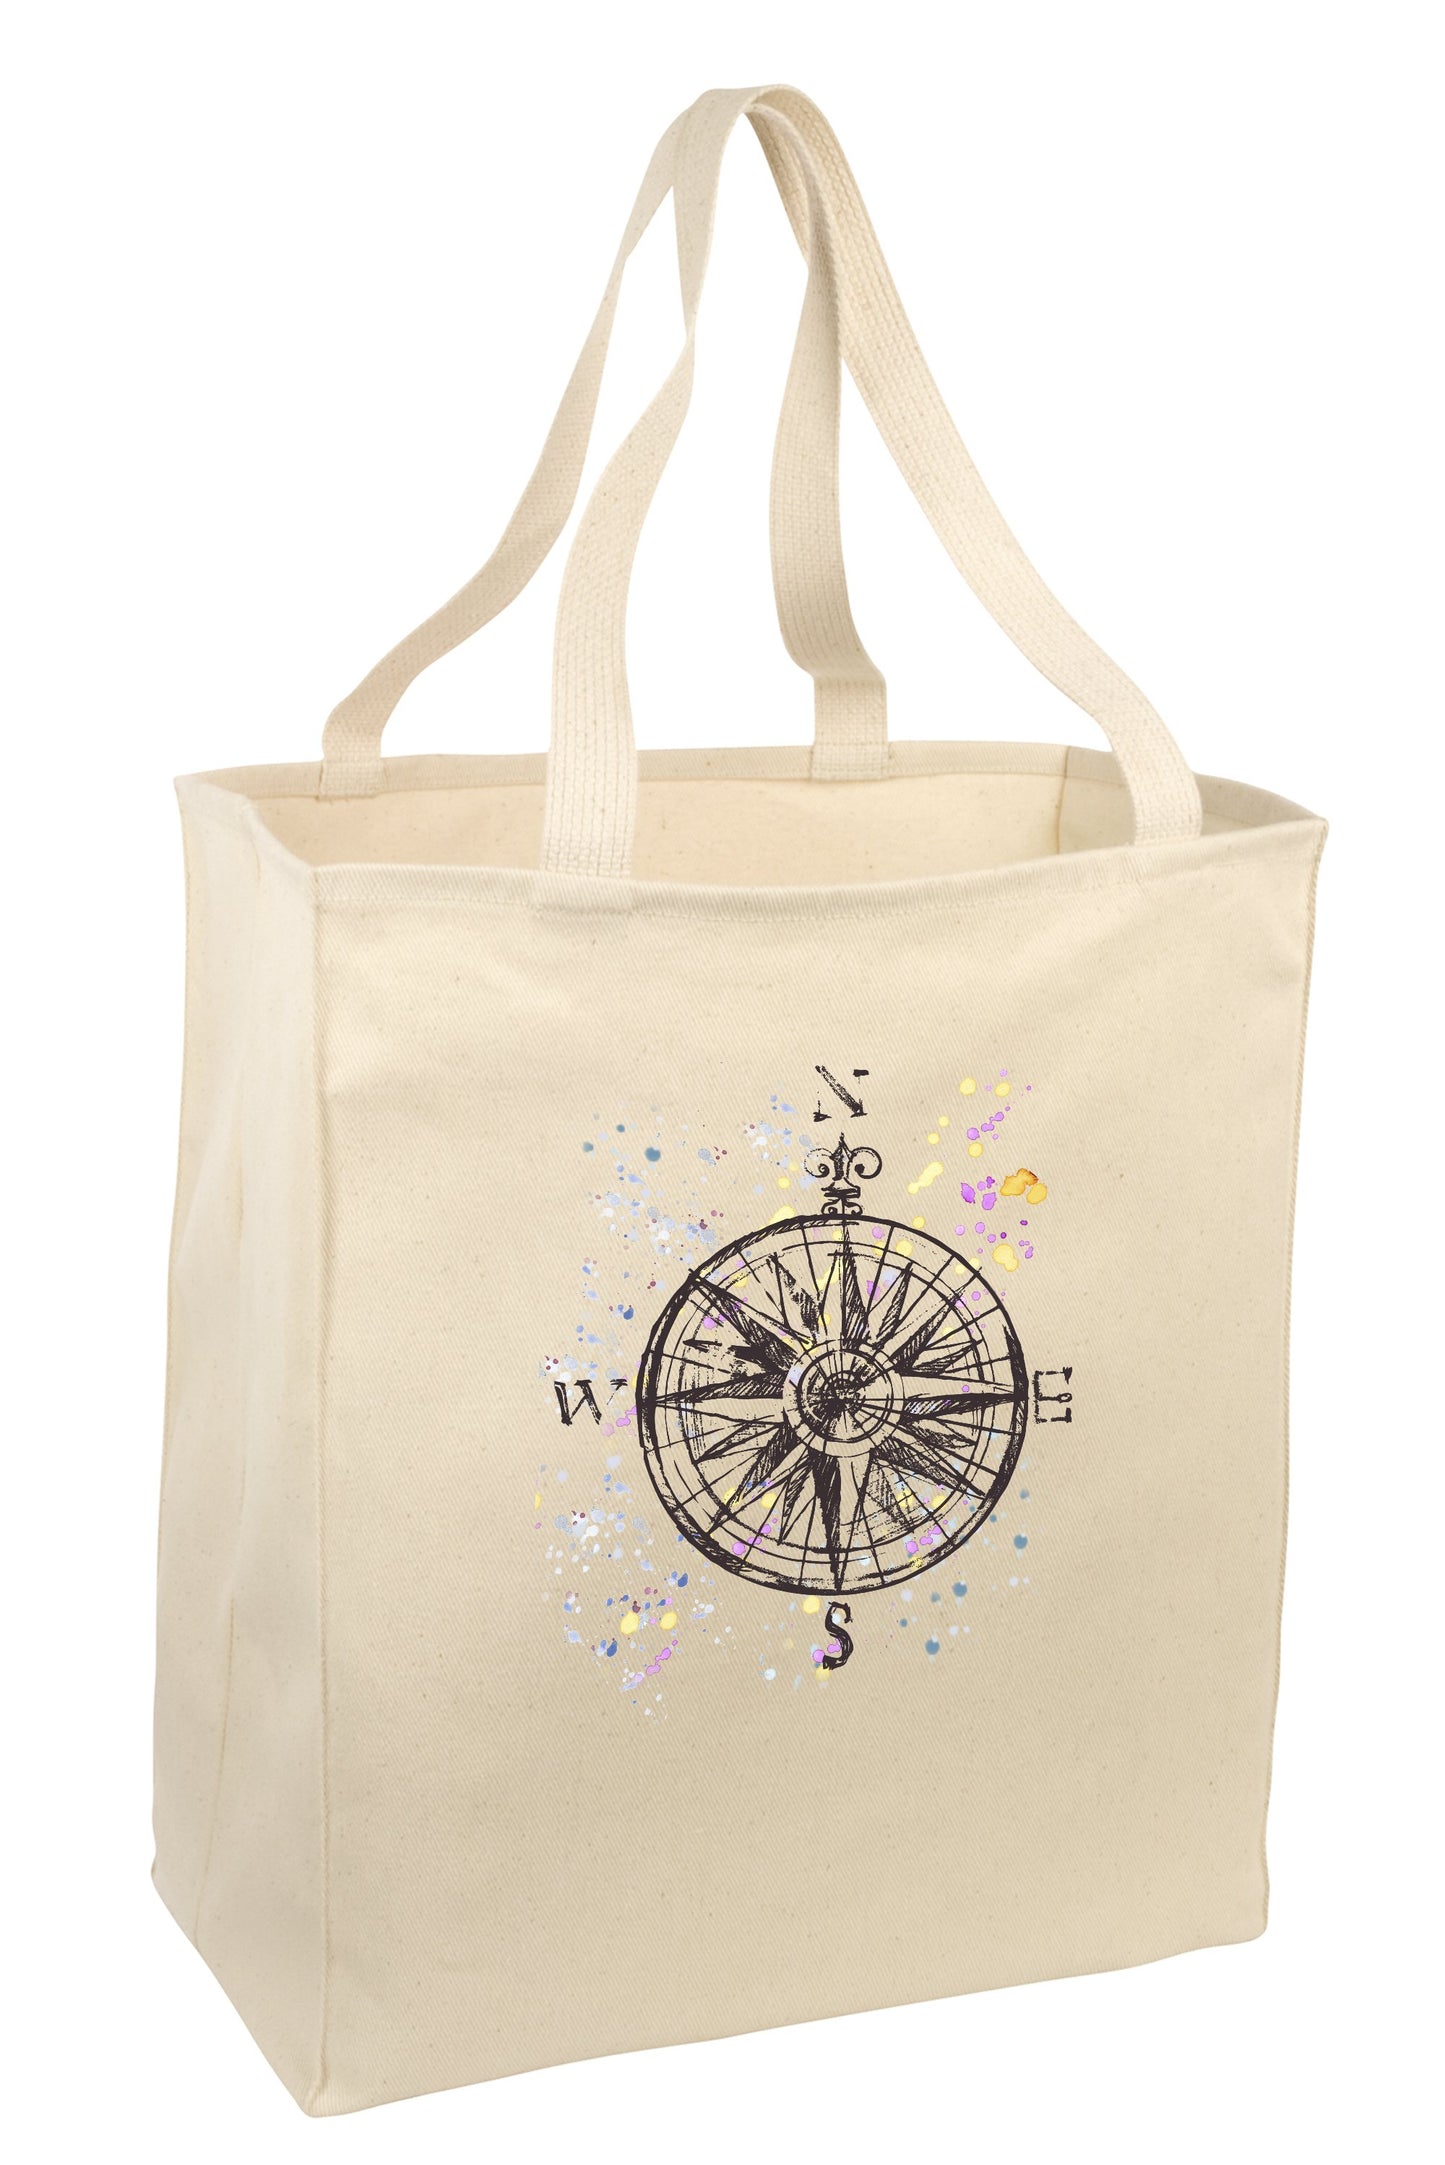 Over the Shoulder Beach Summer Tote Bag. Durable 100% Cotton and 22" Long Handle Shopping Bag. (Compass)